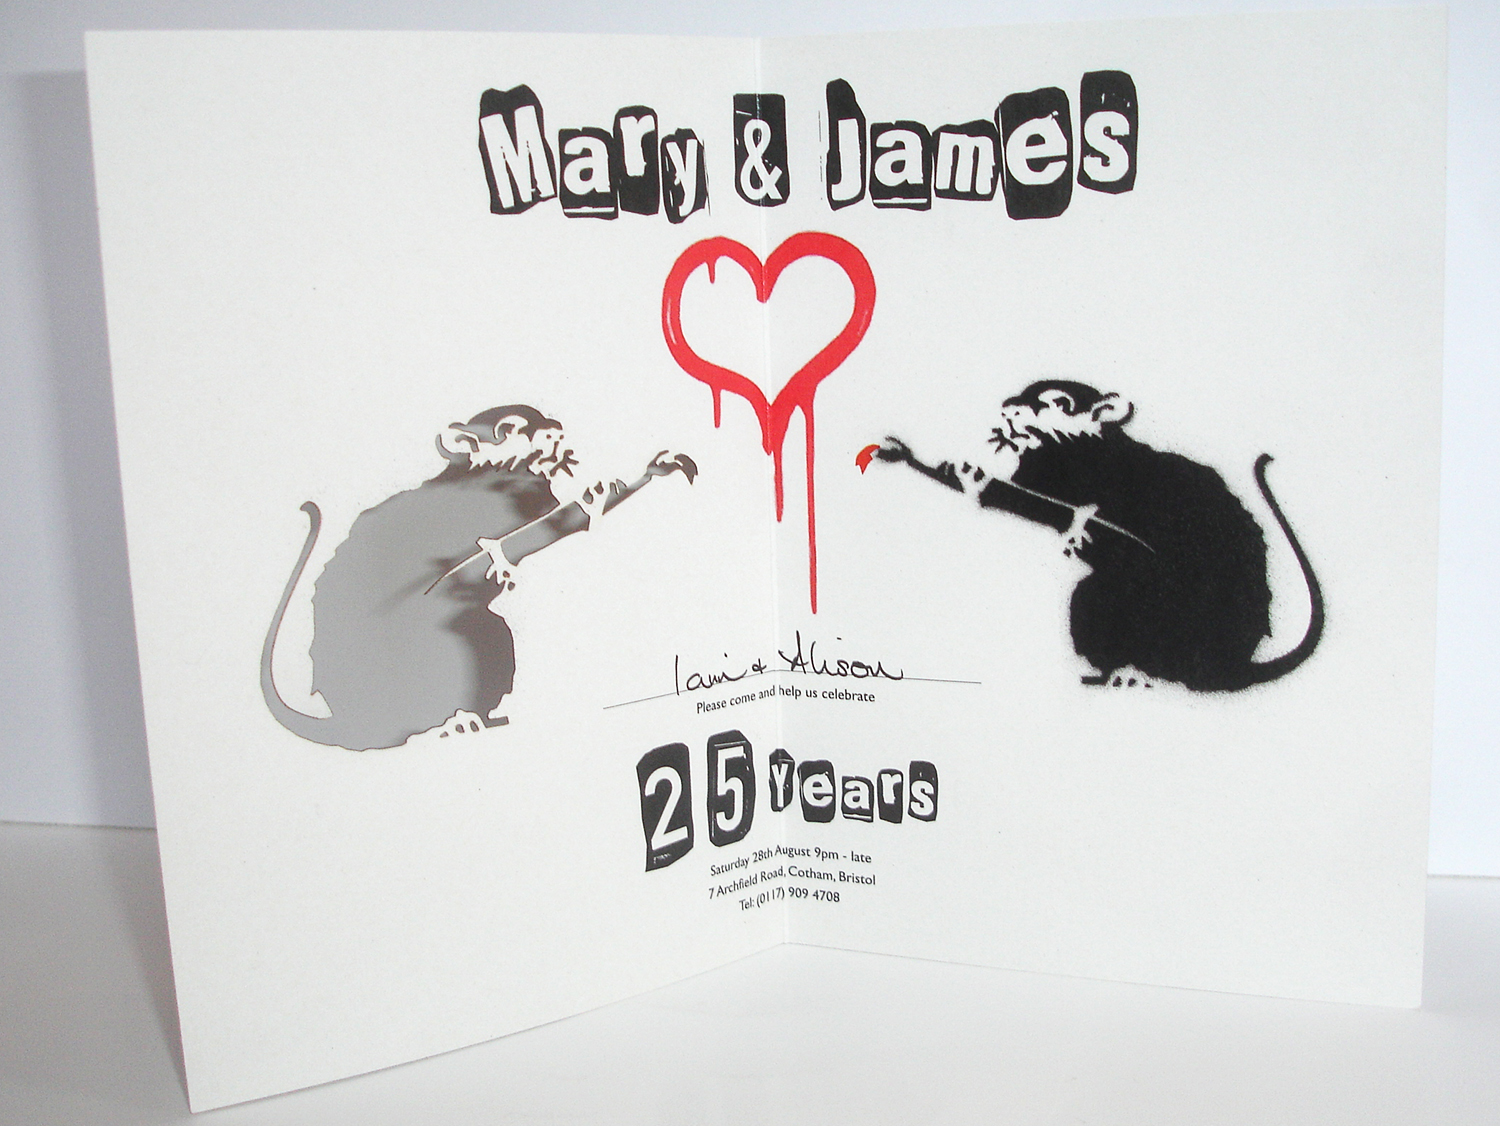 Contempory laser cut card for a wedding anniversary 